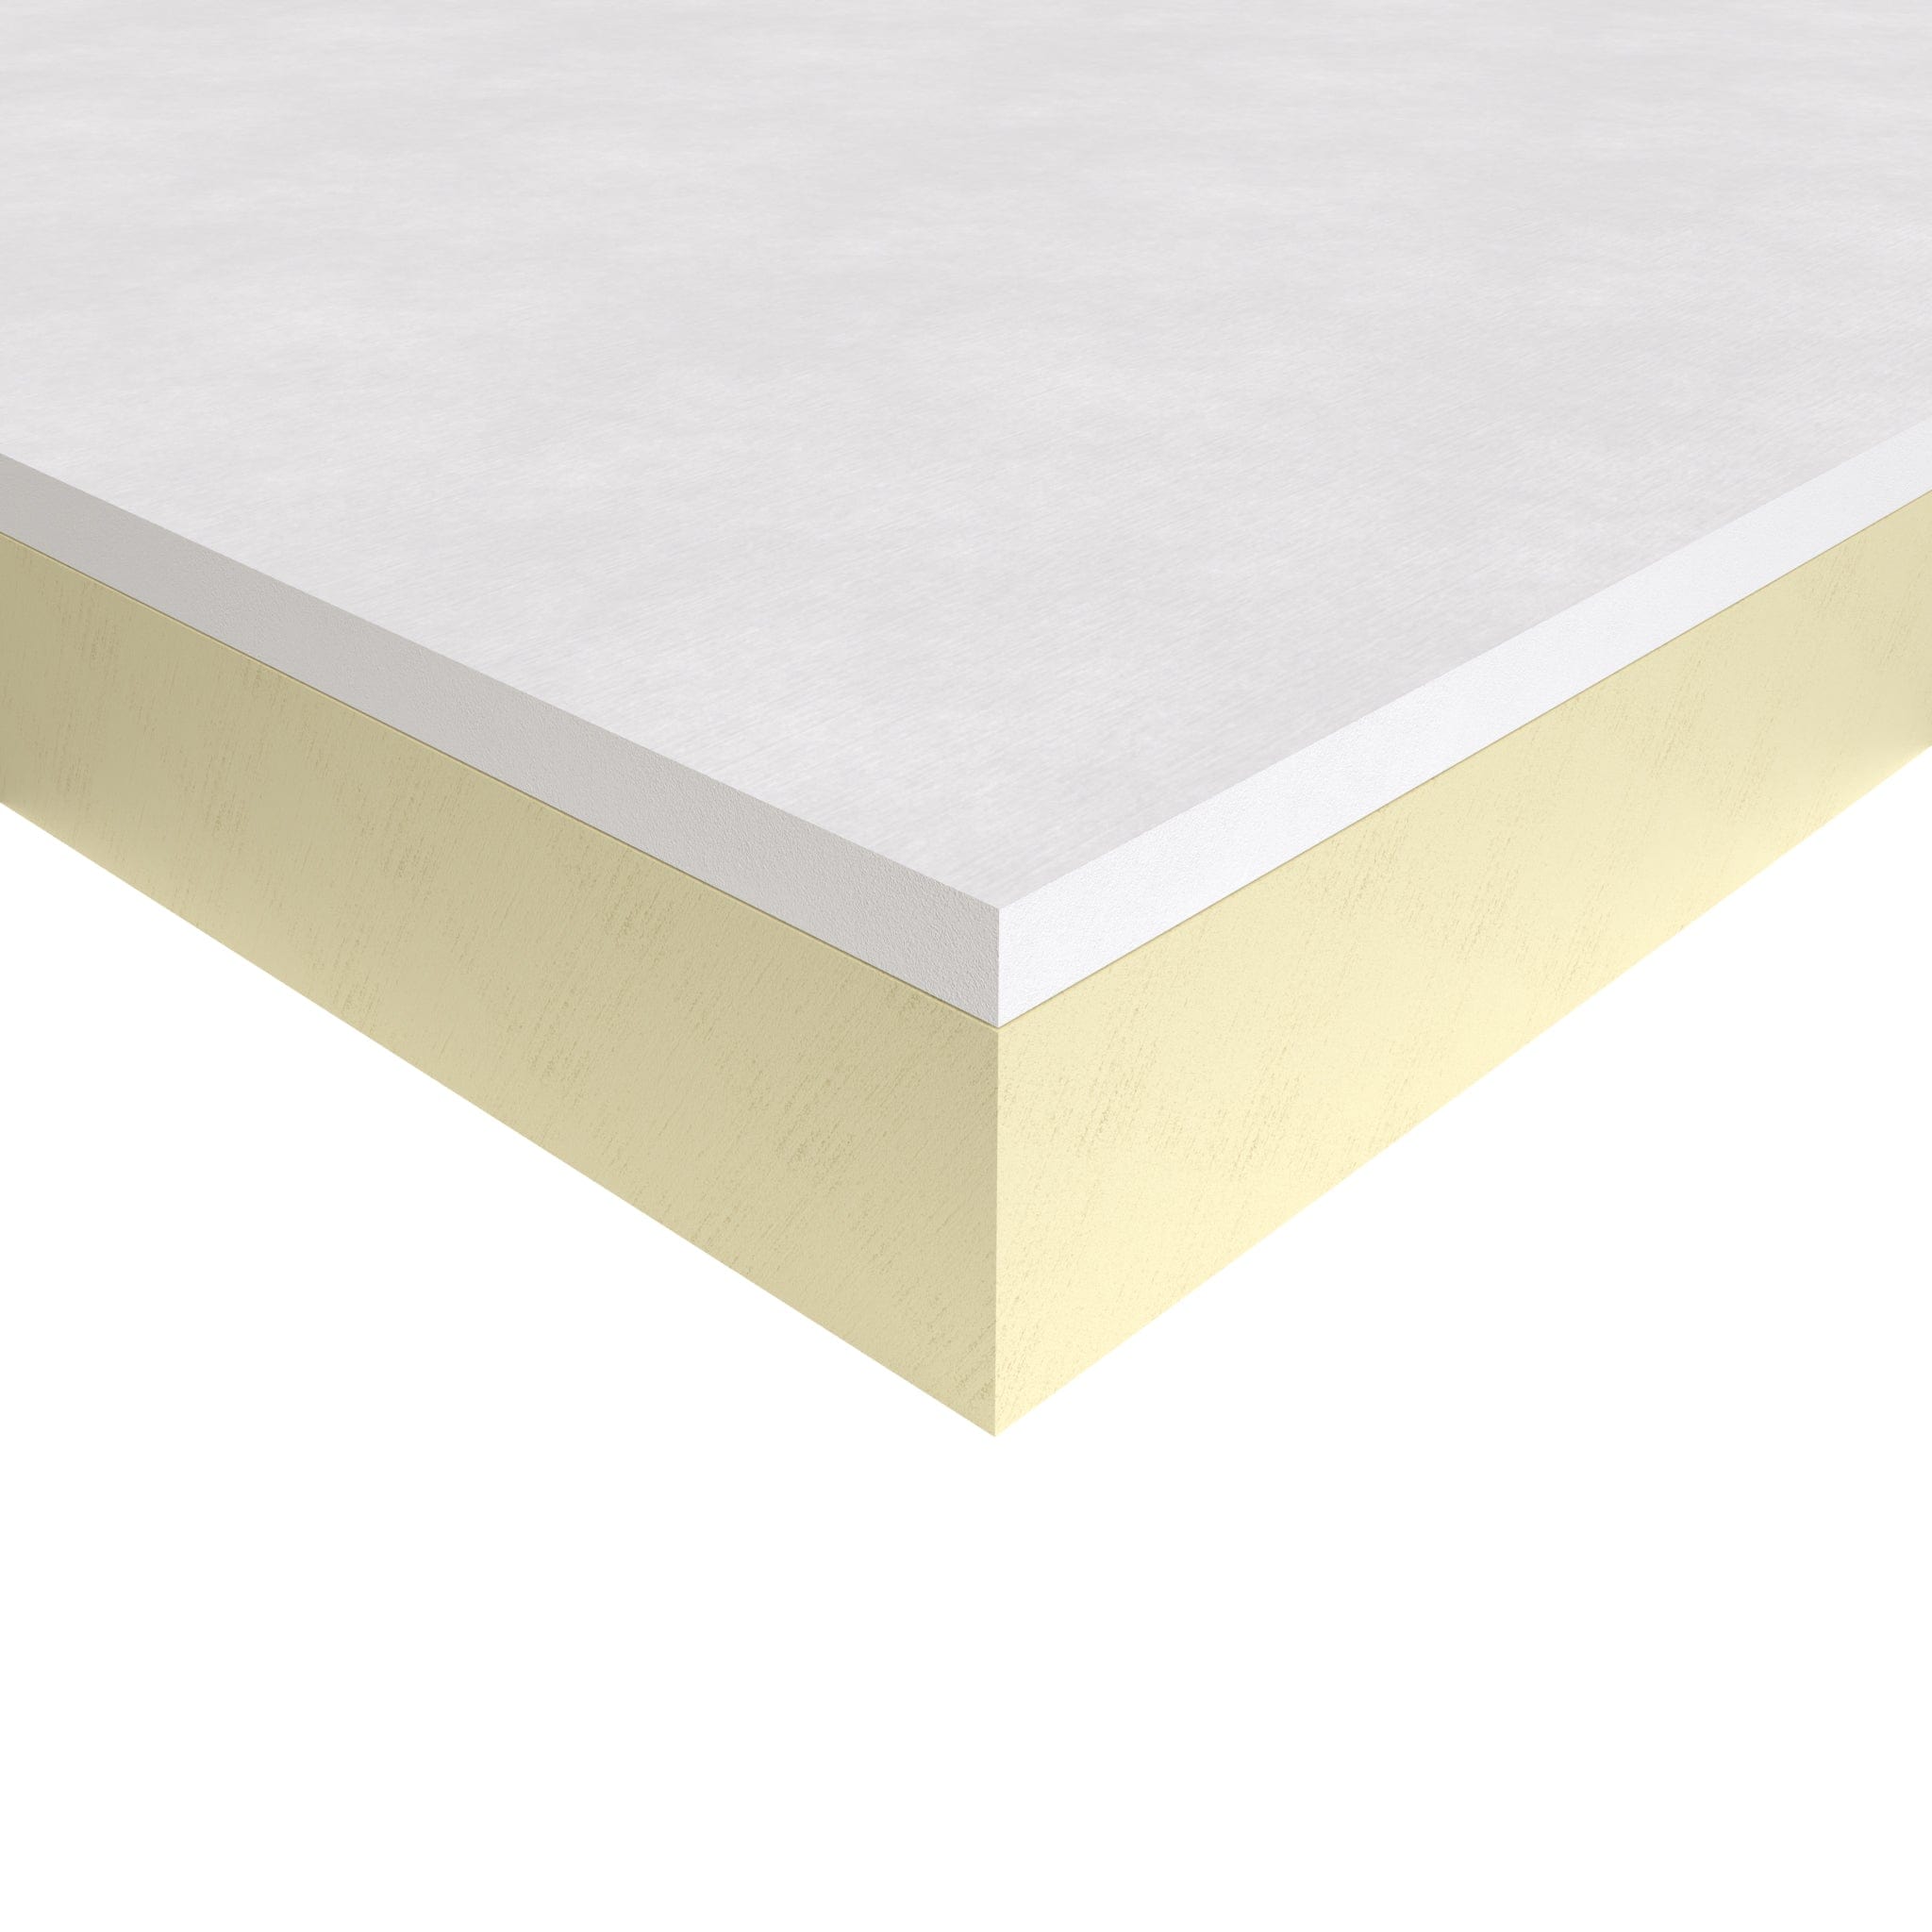 Tekwarm Insulation 1200mm x 600mm x 37.5mm ( Pack of 4 ) Tekwarm PIR Pitched Roof Insulation Handy Board | 1200 x 600mm (Pack of 4) IUK01150